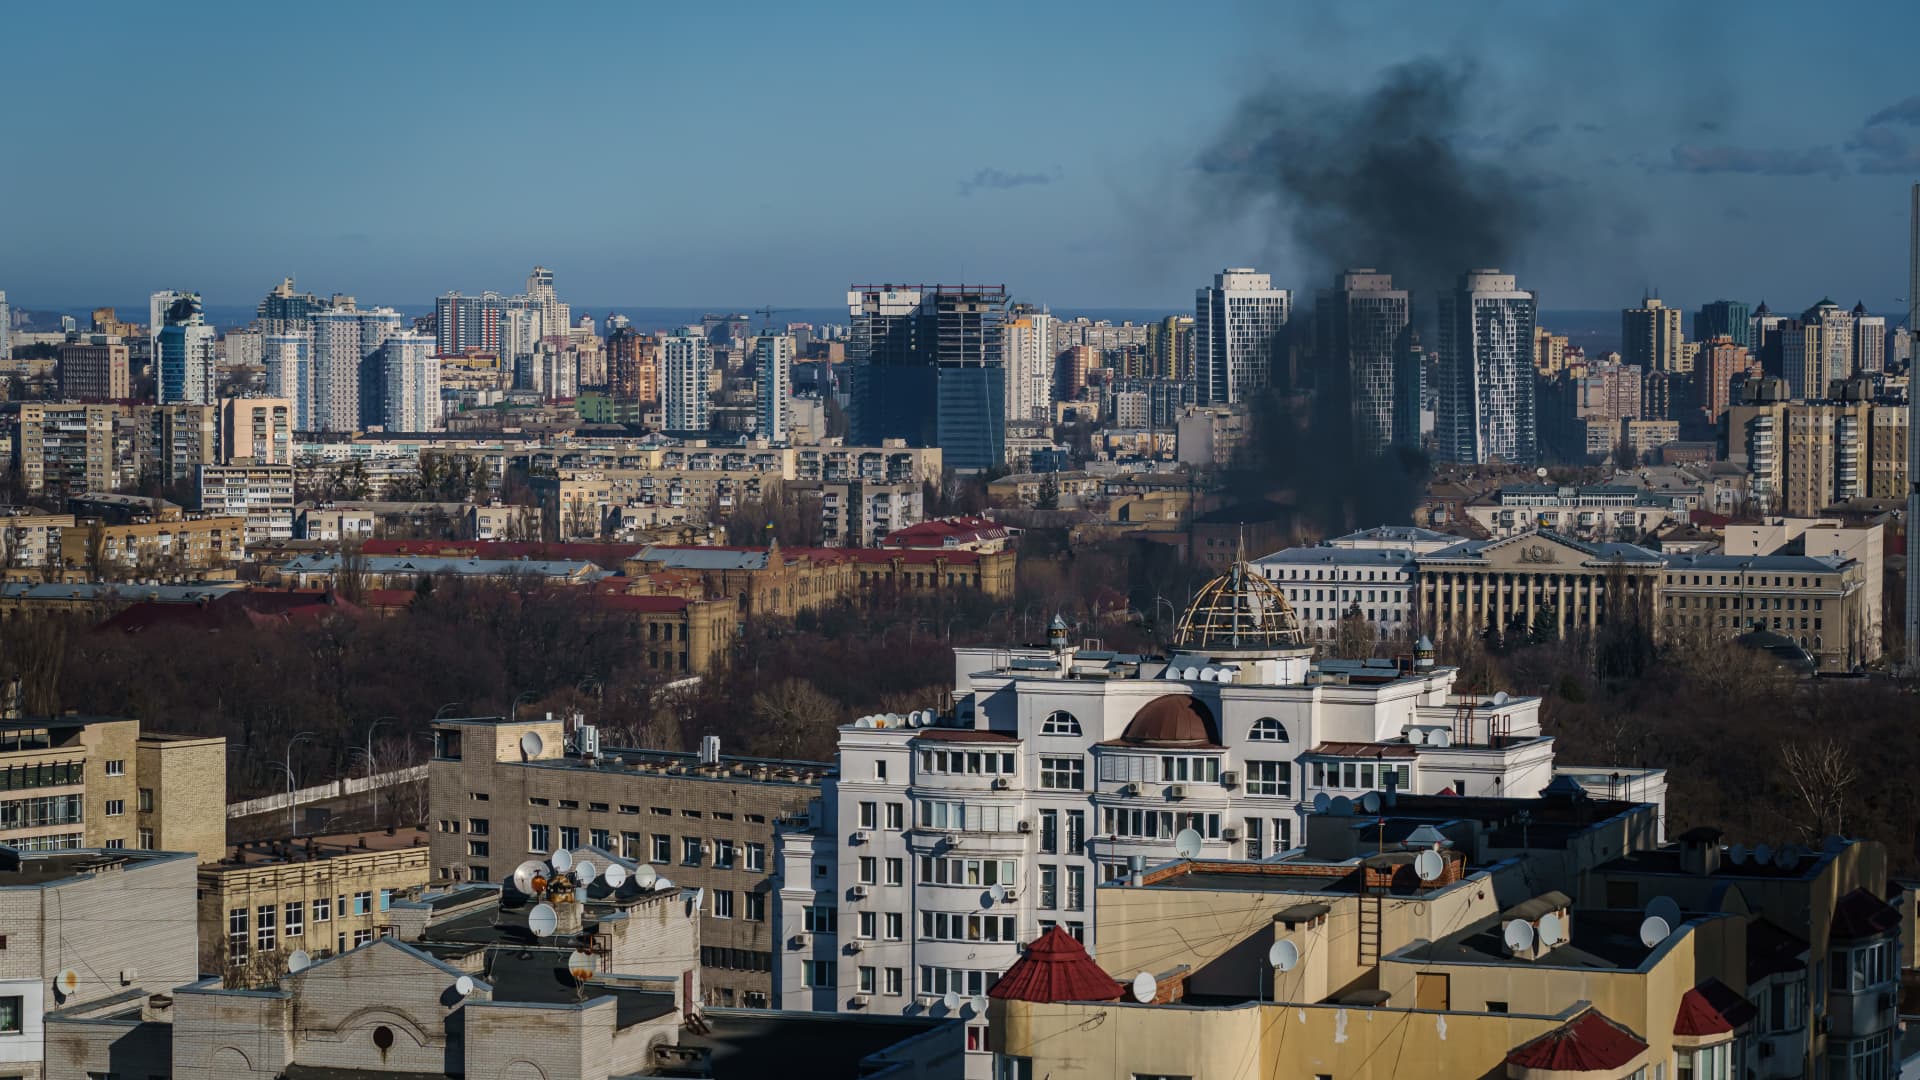 Day 3 of Russia's invasion of Ukraine. A smoke column rises after an attack in Kyiv, Ukraine on Feb. 26, 2022.